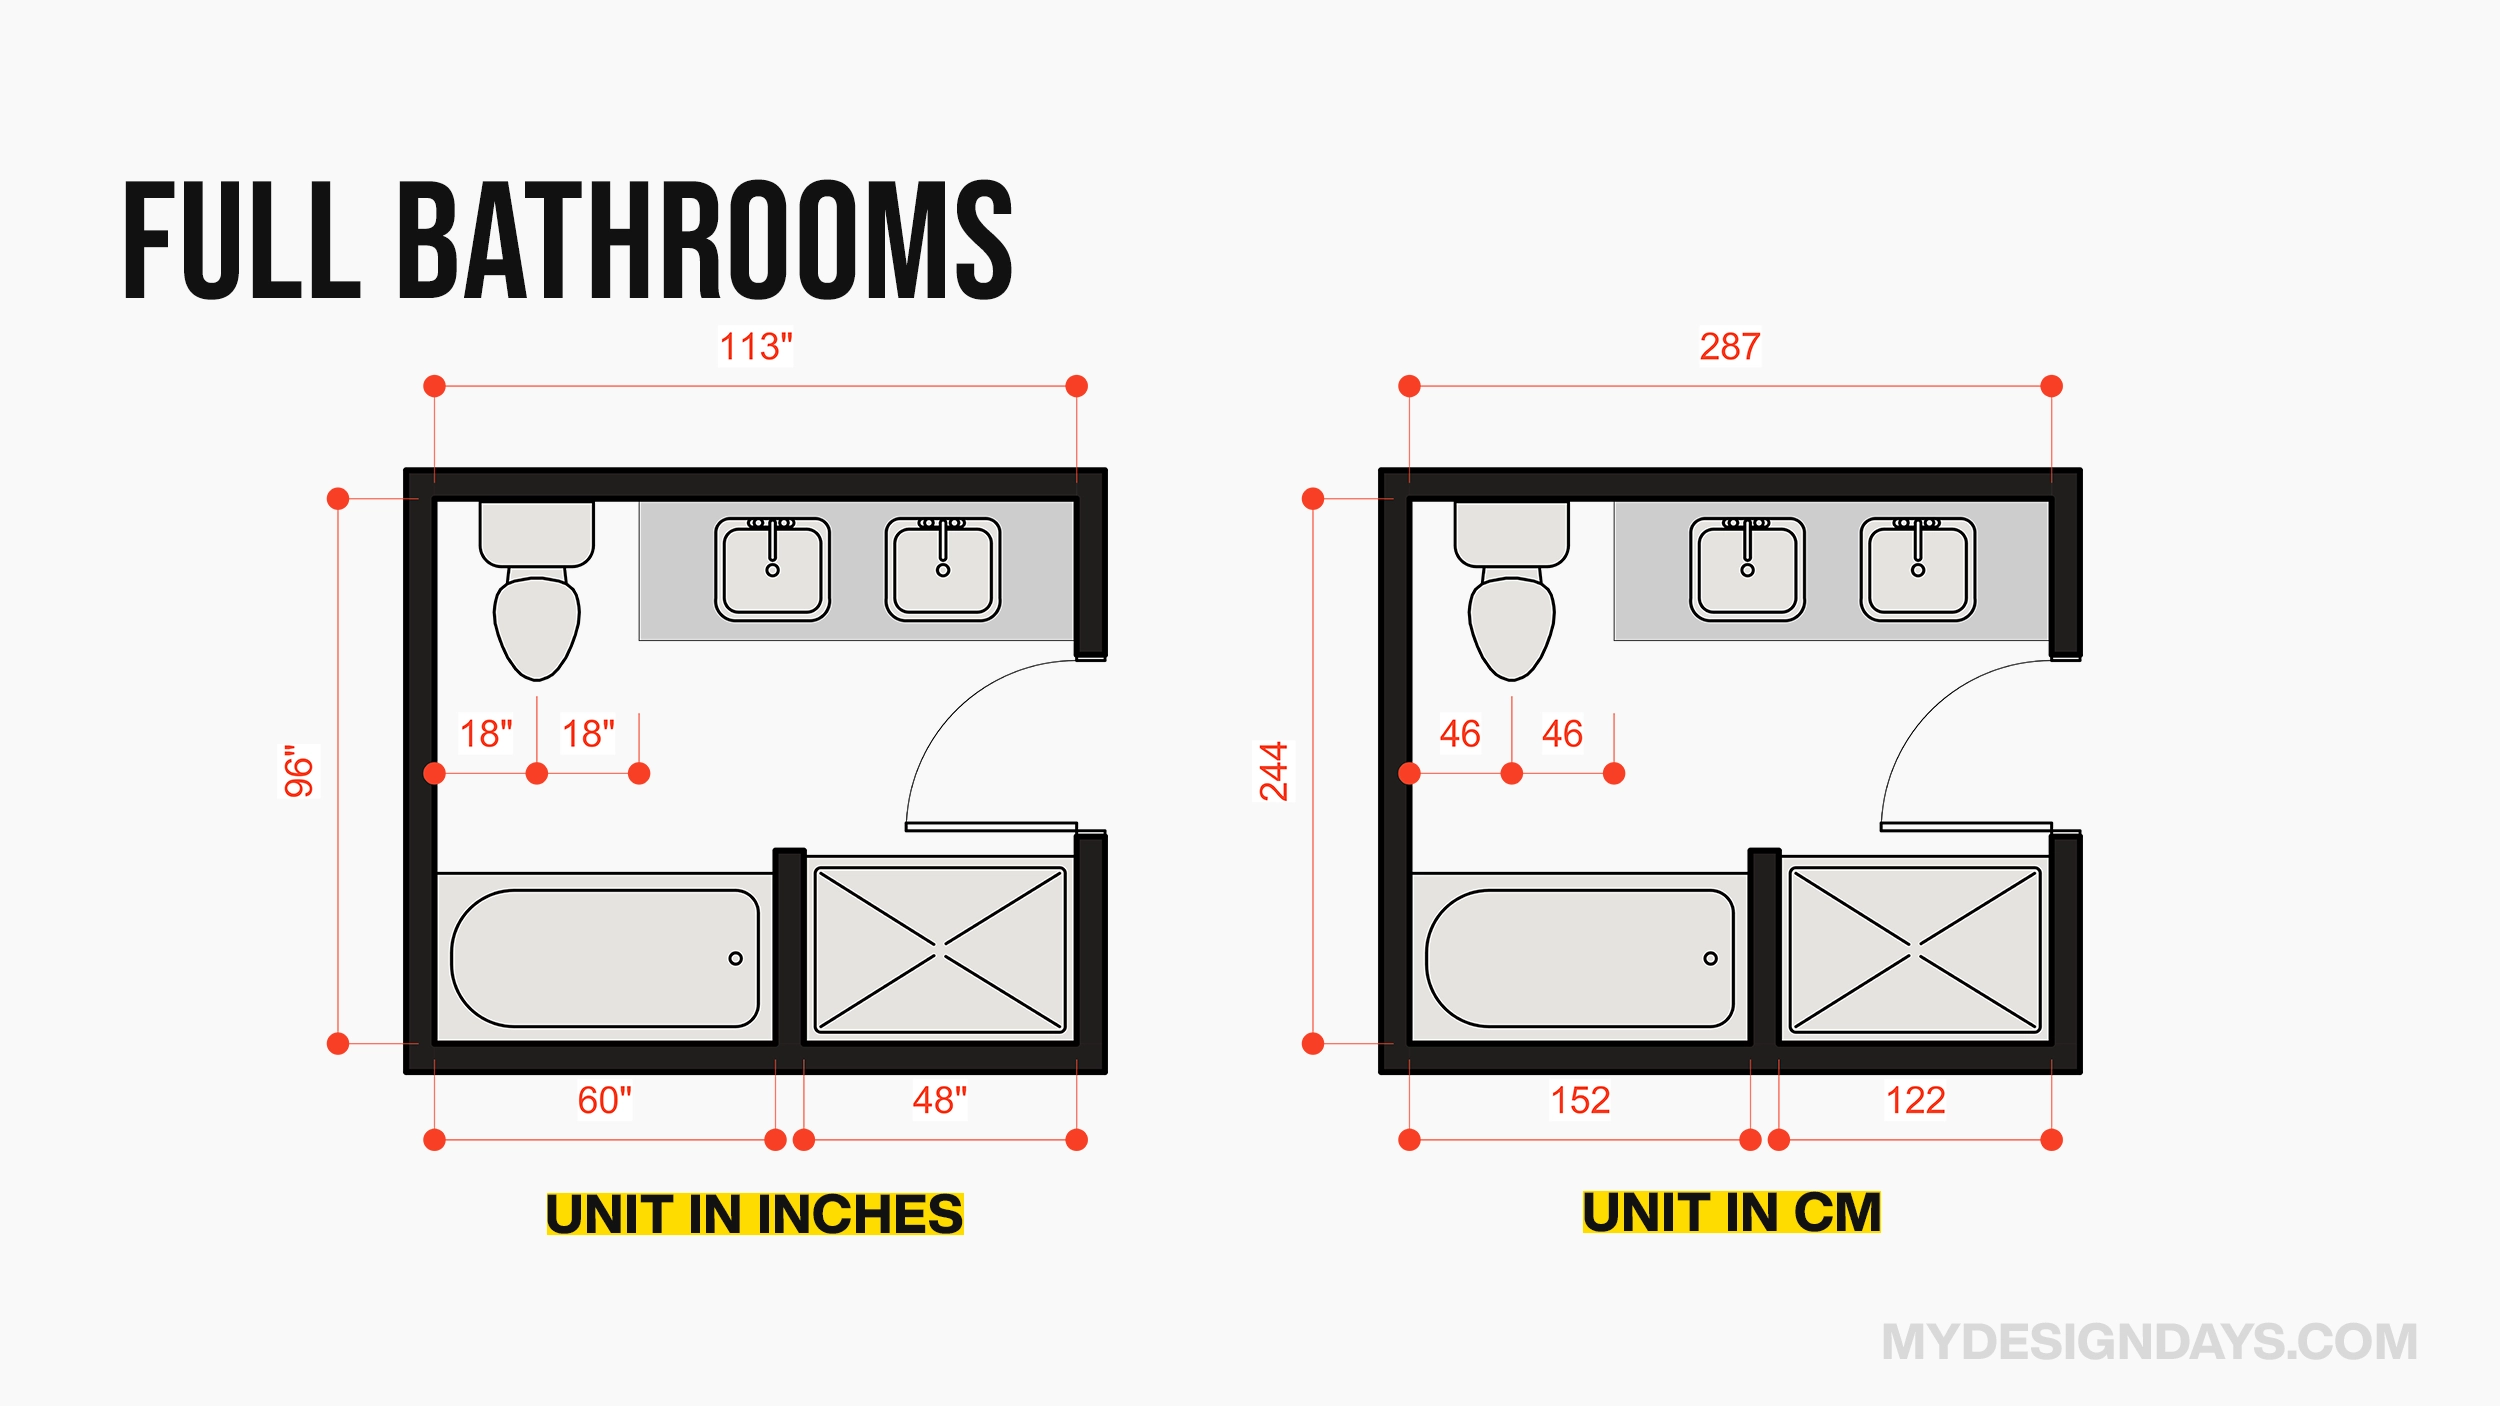 Full Bathroom layout examples with dimensions in CMS and Inches